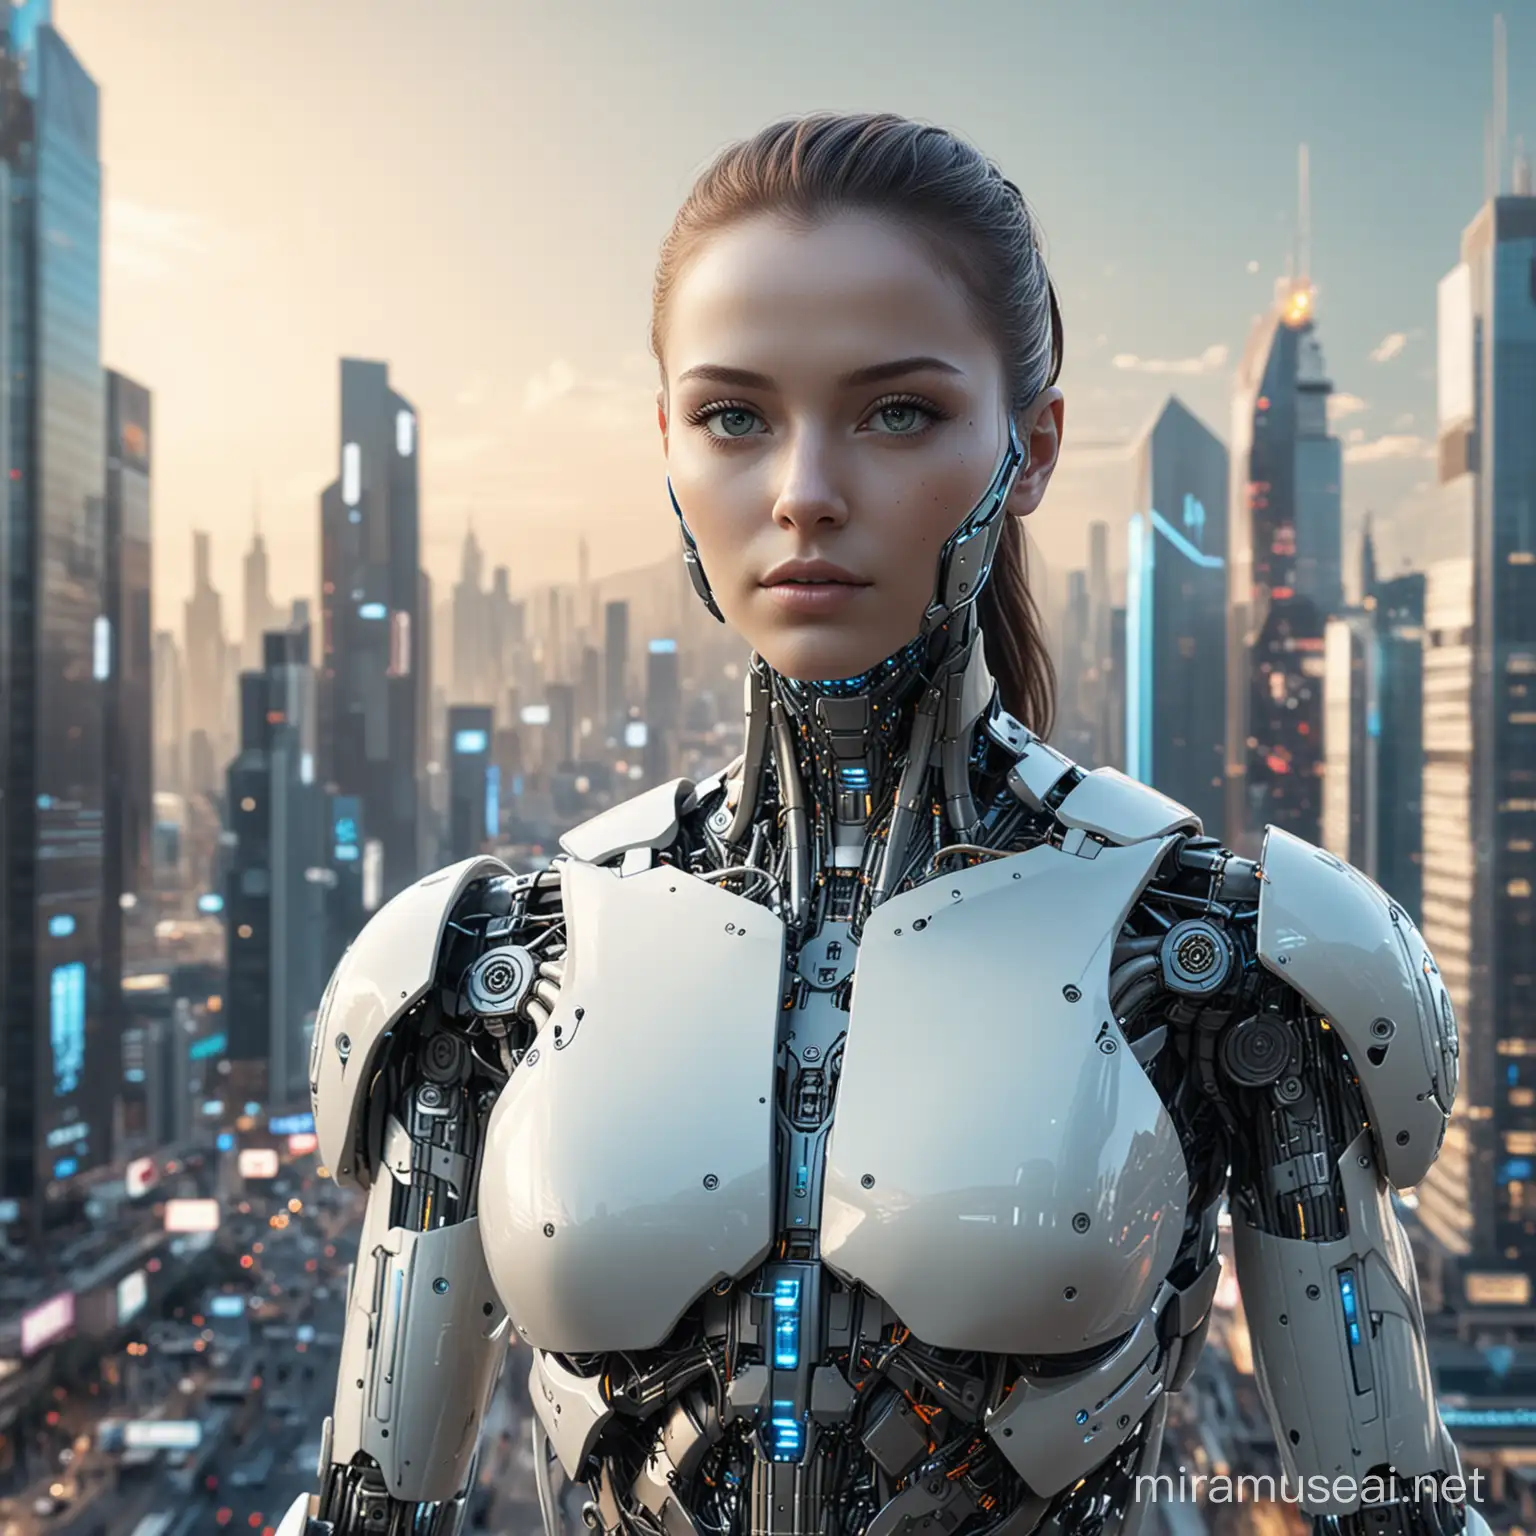 An ai-powered humanoid depicting that new age of ai has come. Futuristic city in a background. 